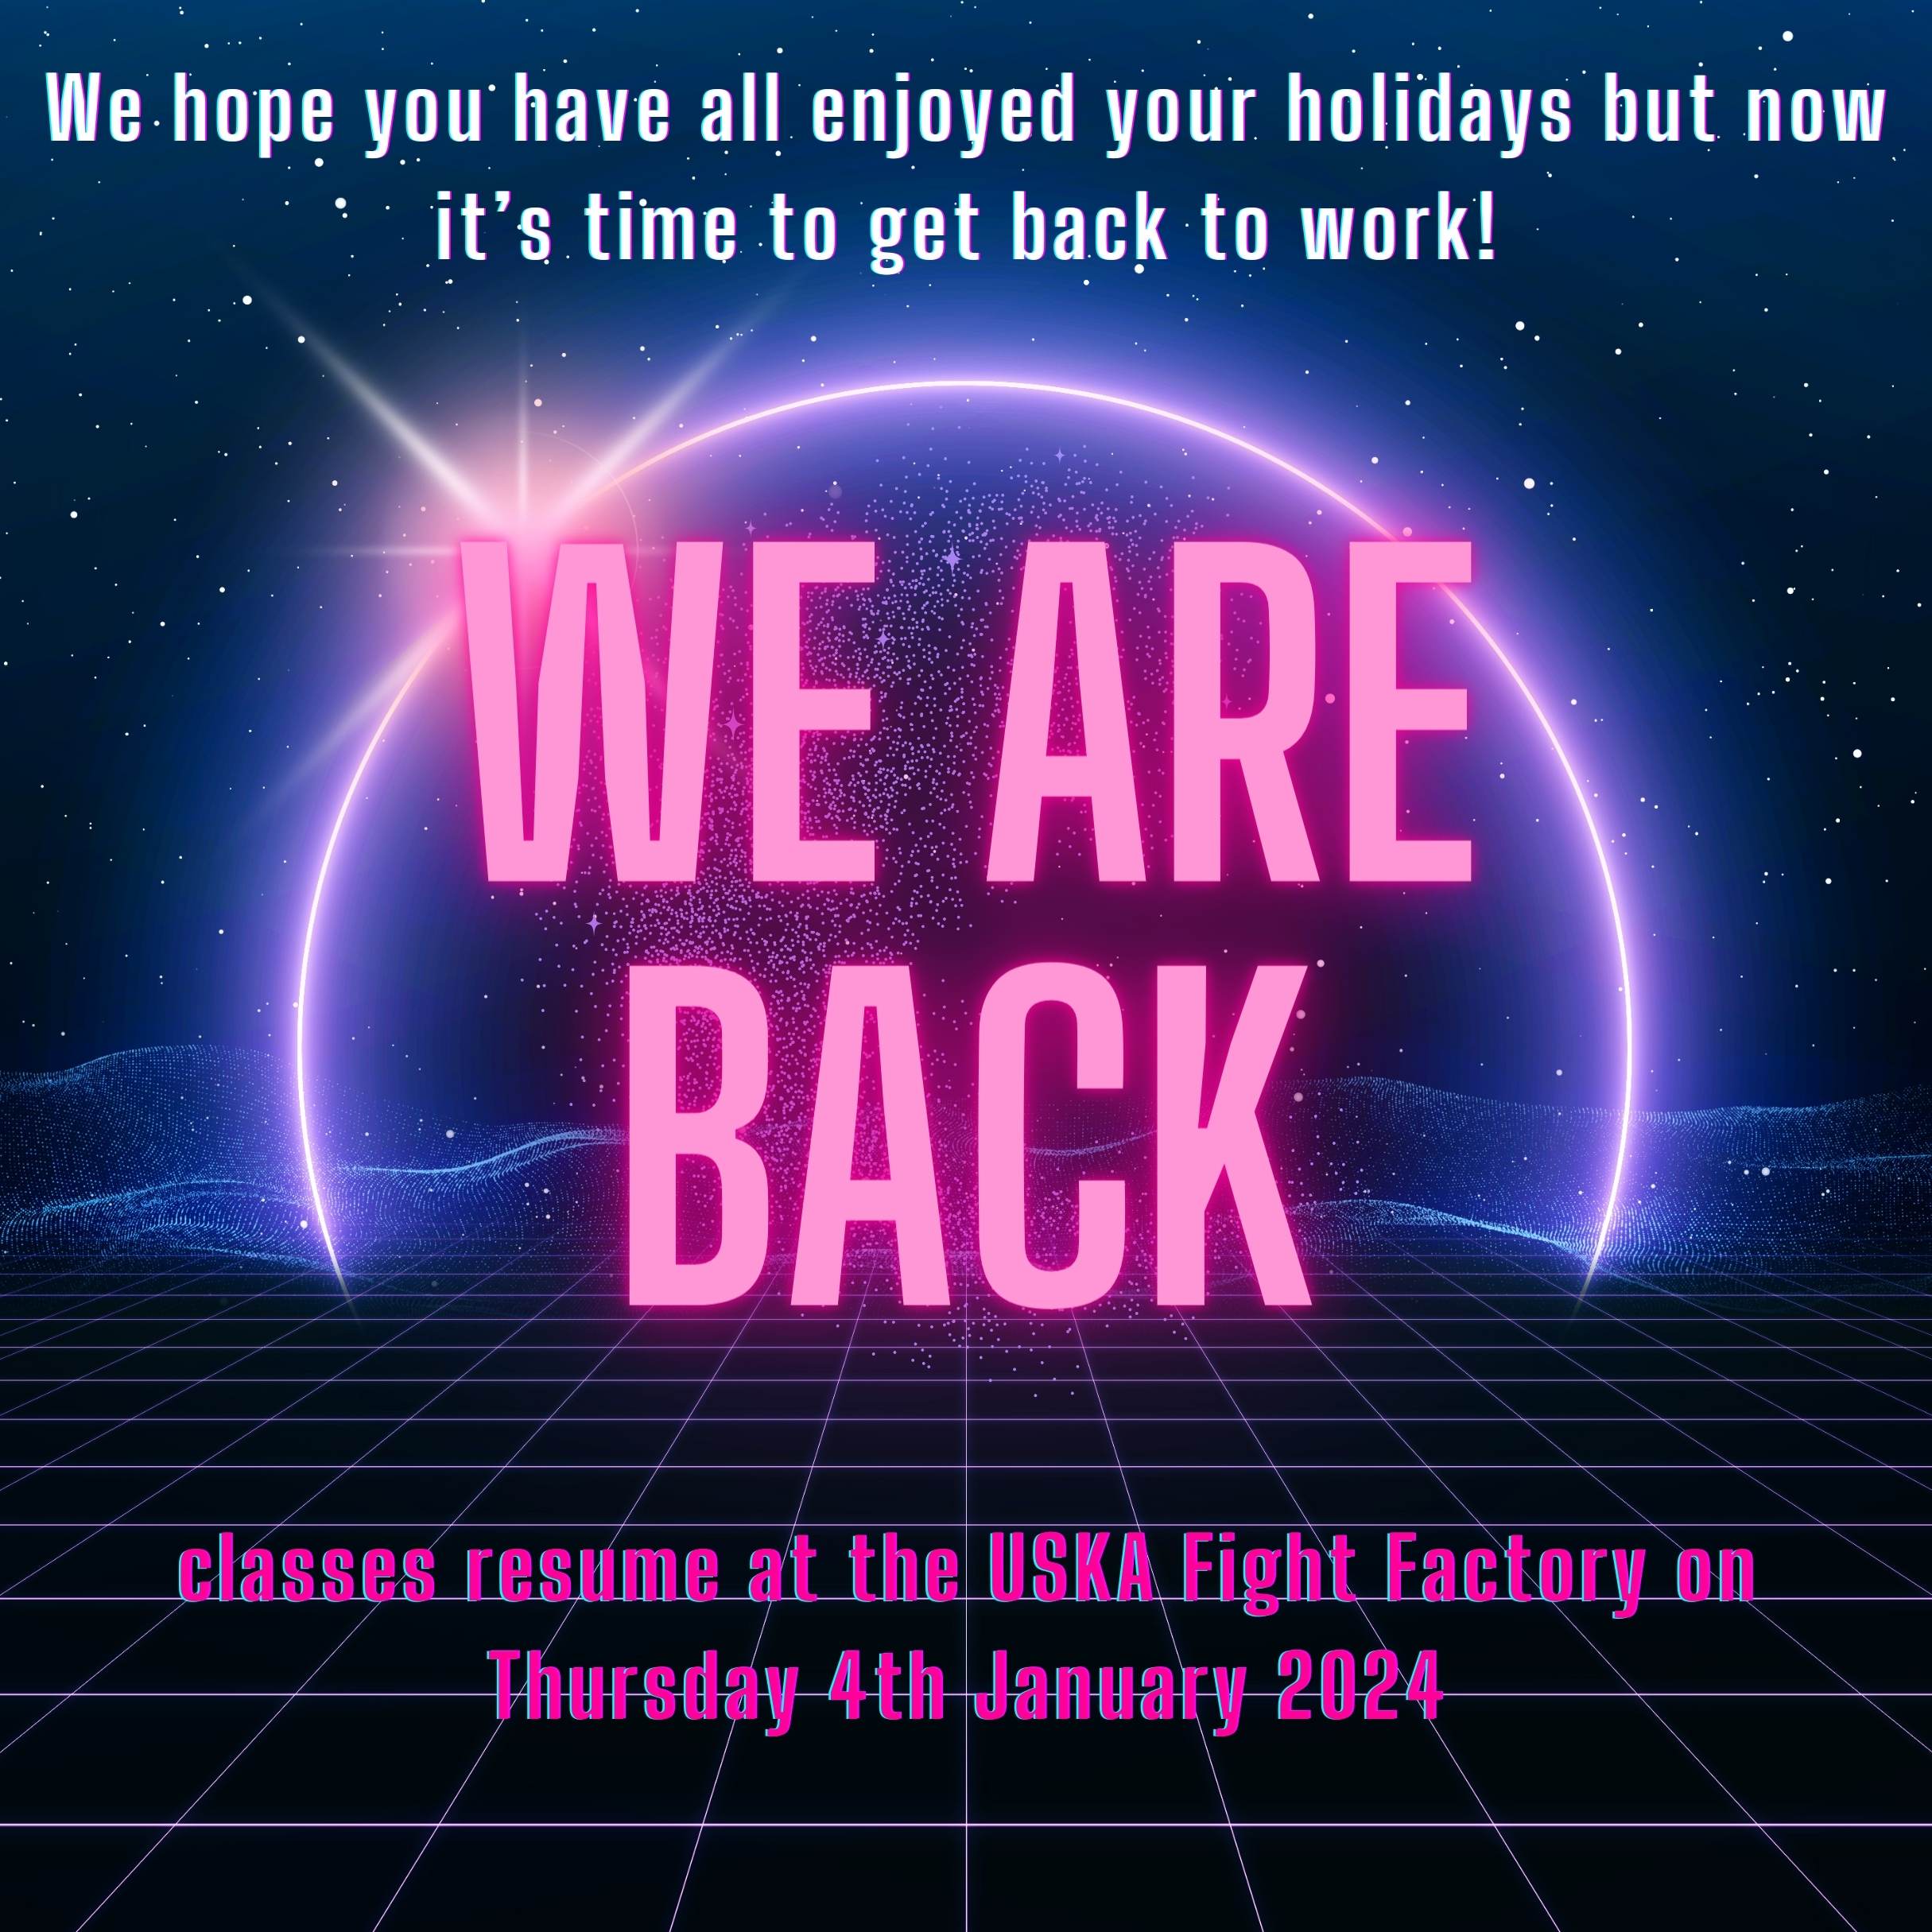 Classes Resume at the USKA Fight Factory!